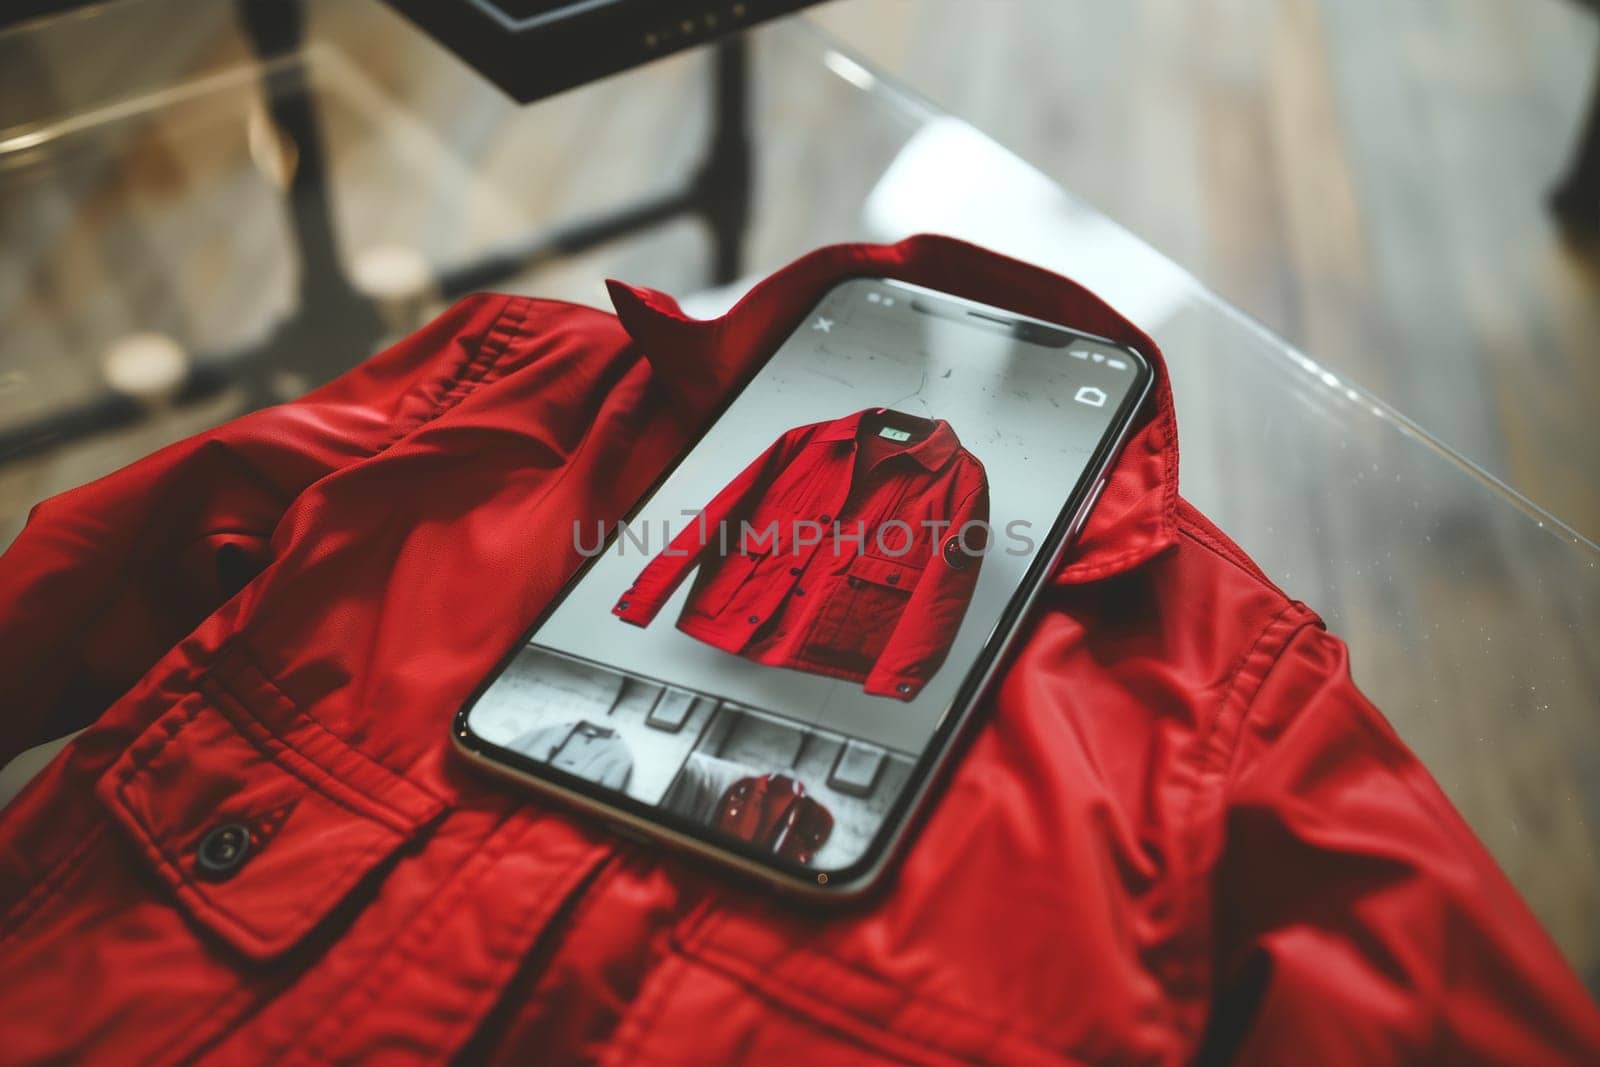 A black cell phone placed on top of a vibrant red jacket, creating a contrast in colors and textures.